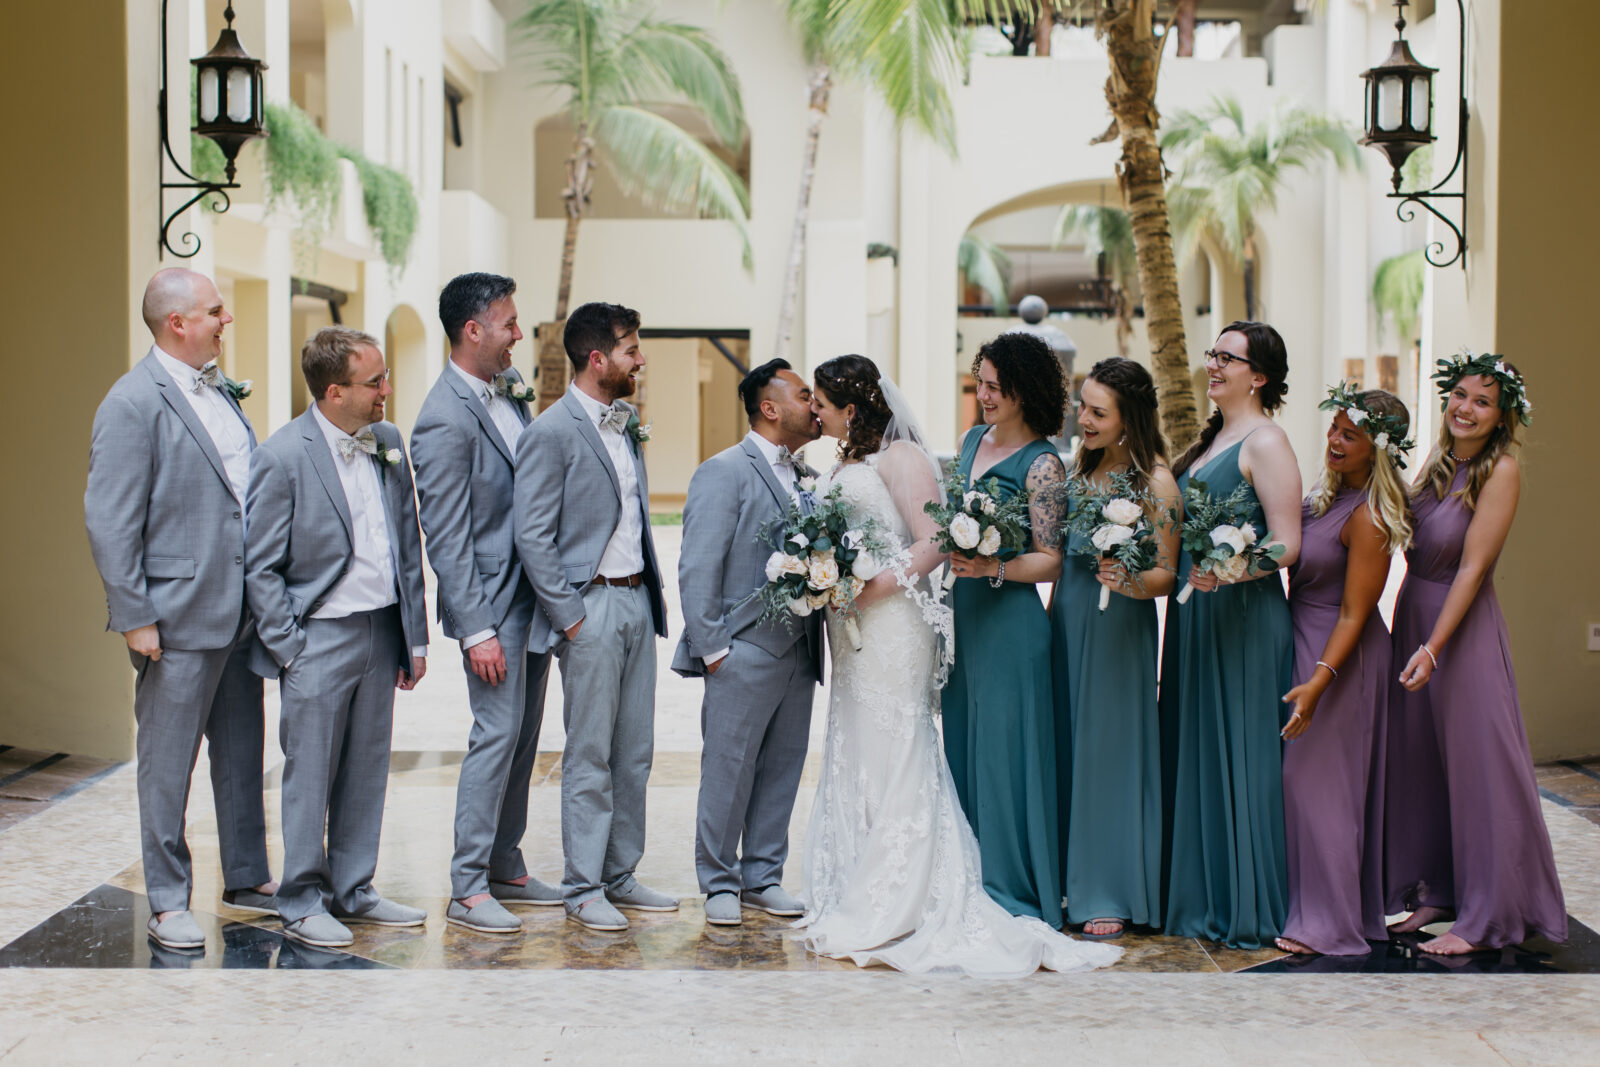 A lovely photo of the bride and groom and their groomsmen and bridesmaids